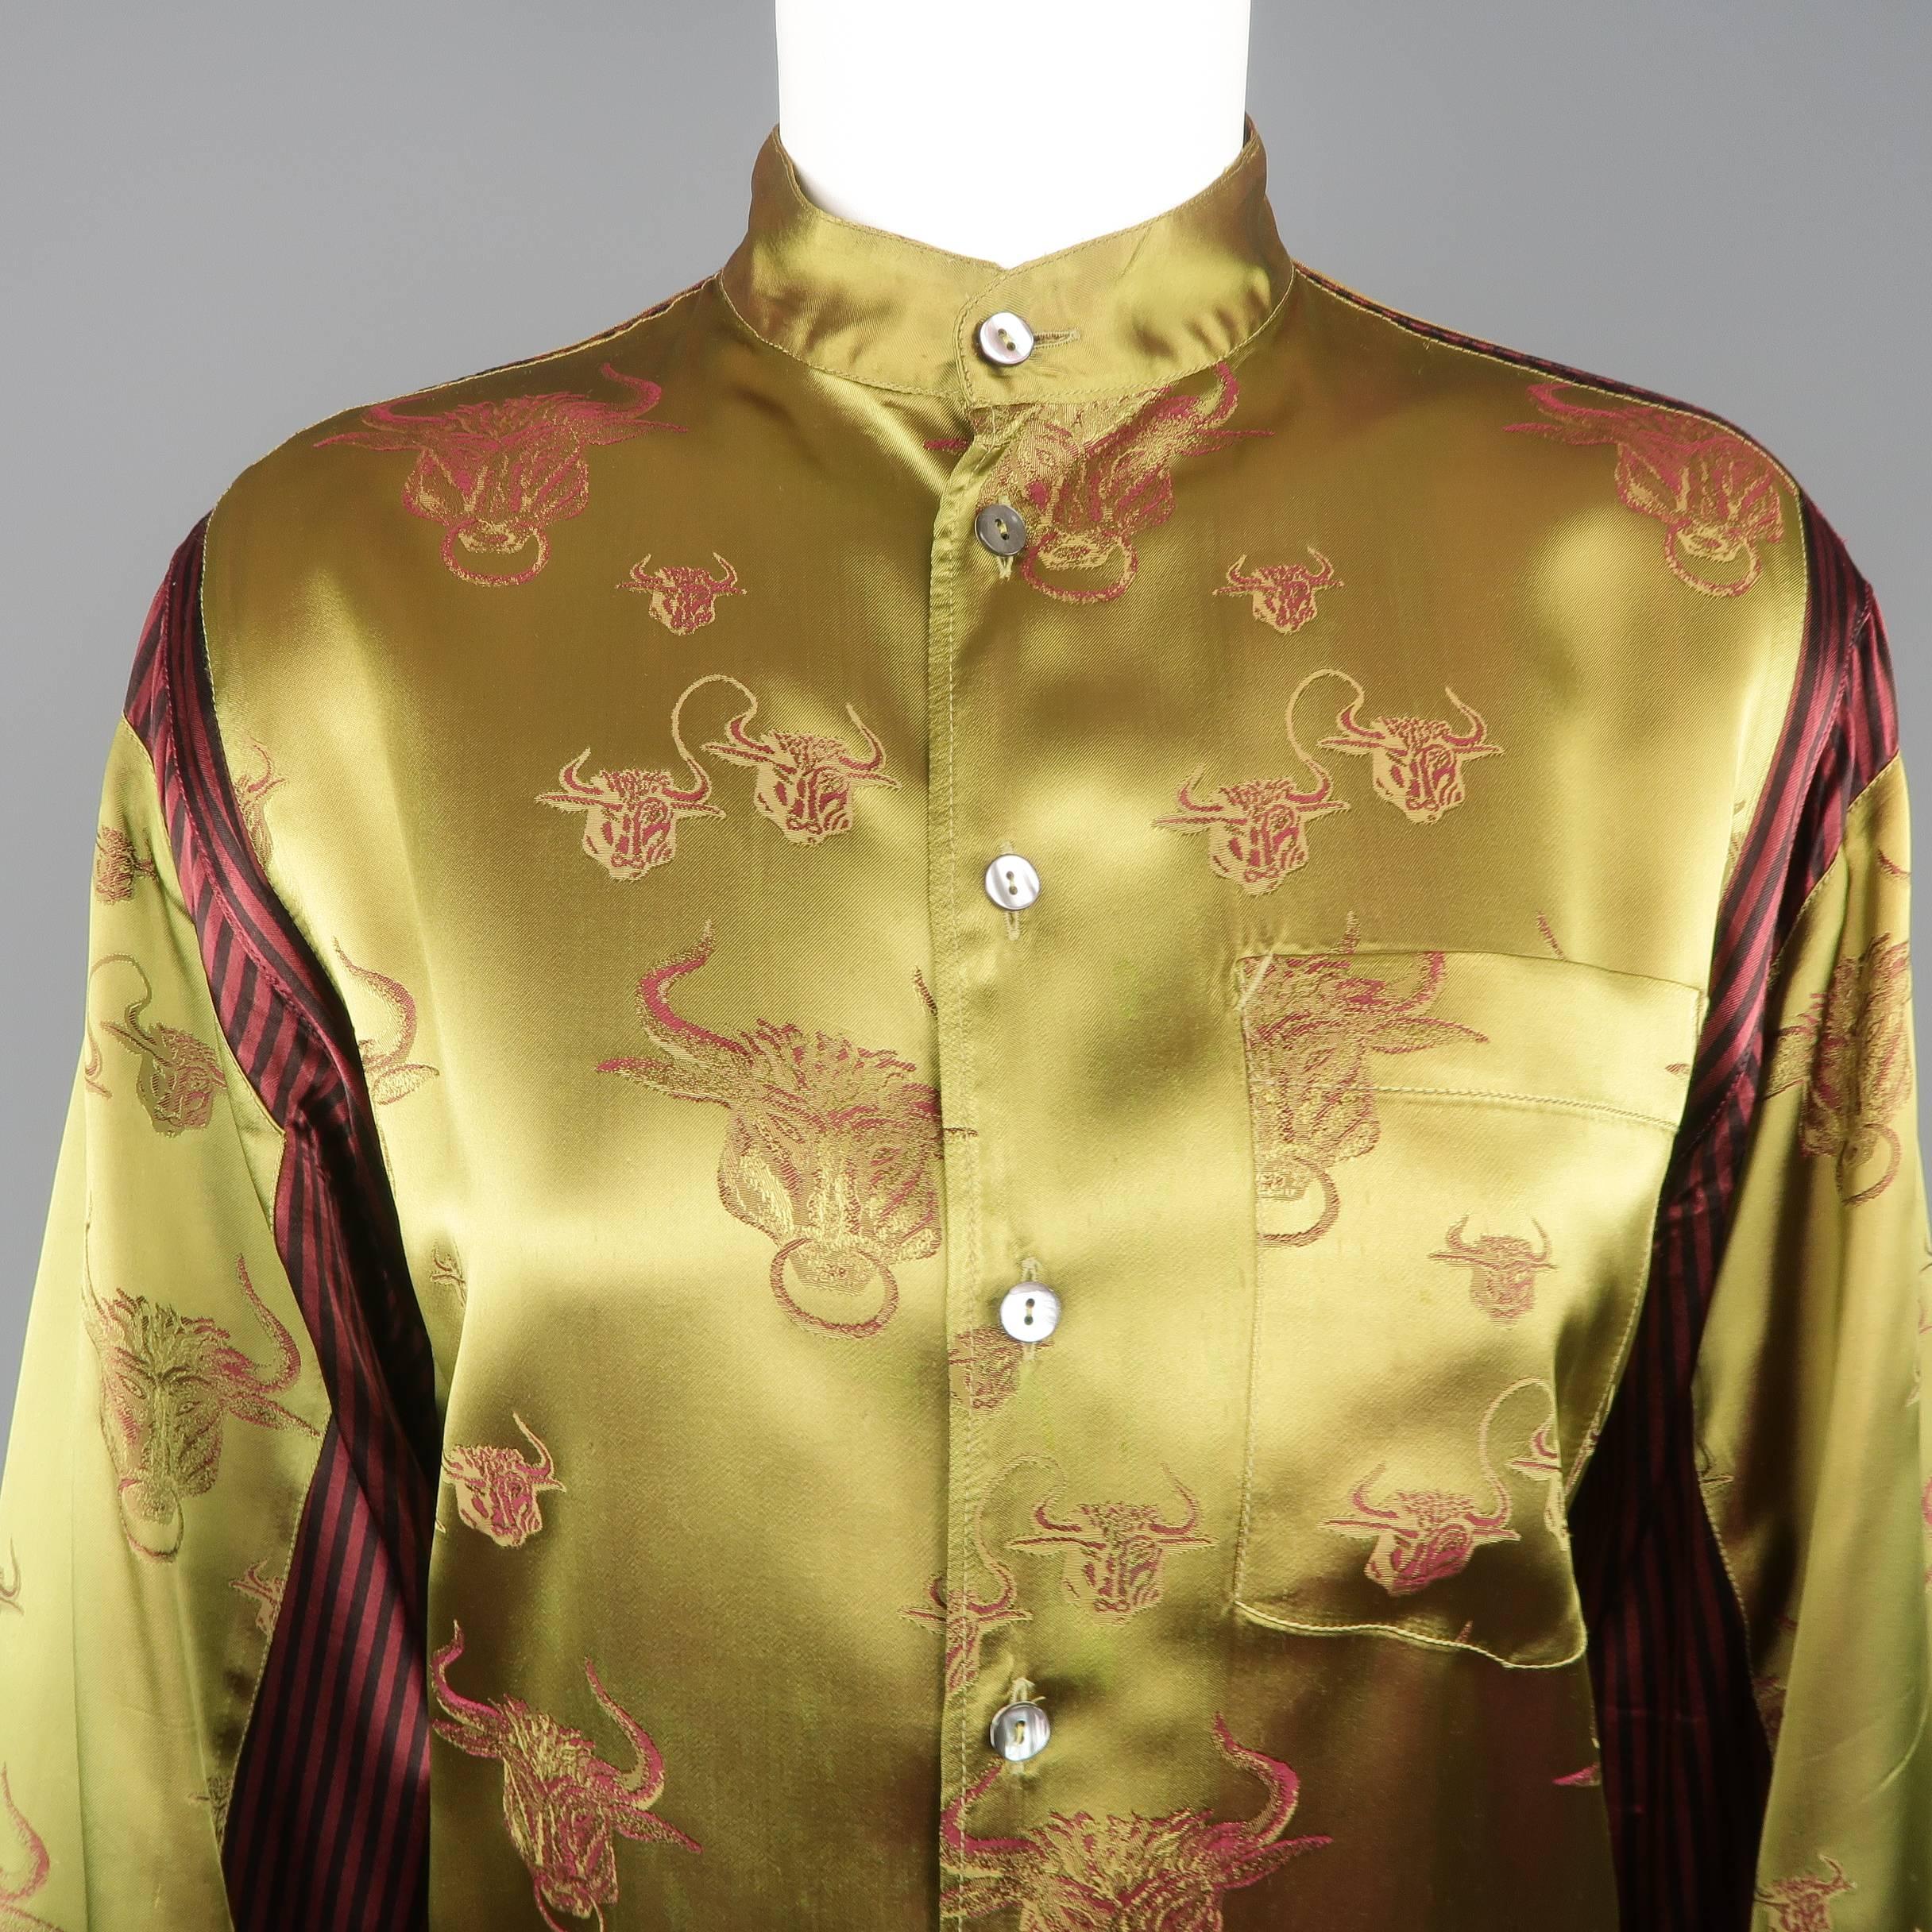 Vintage JEAN PAUL GAULTIER blouse jacket comes in green bull print damask satin and features a band collar, breast and side pockets, and red and black stripe panels. Wear throughout satin and discoloration thorough shoulder and sleeves. As-is.  Made